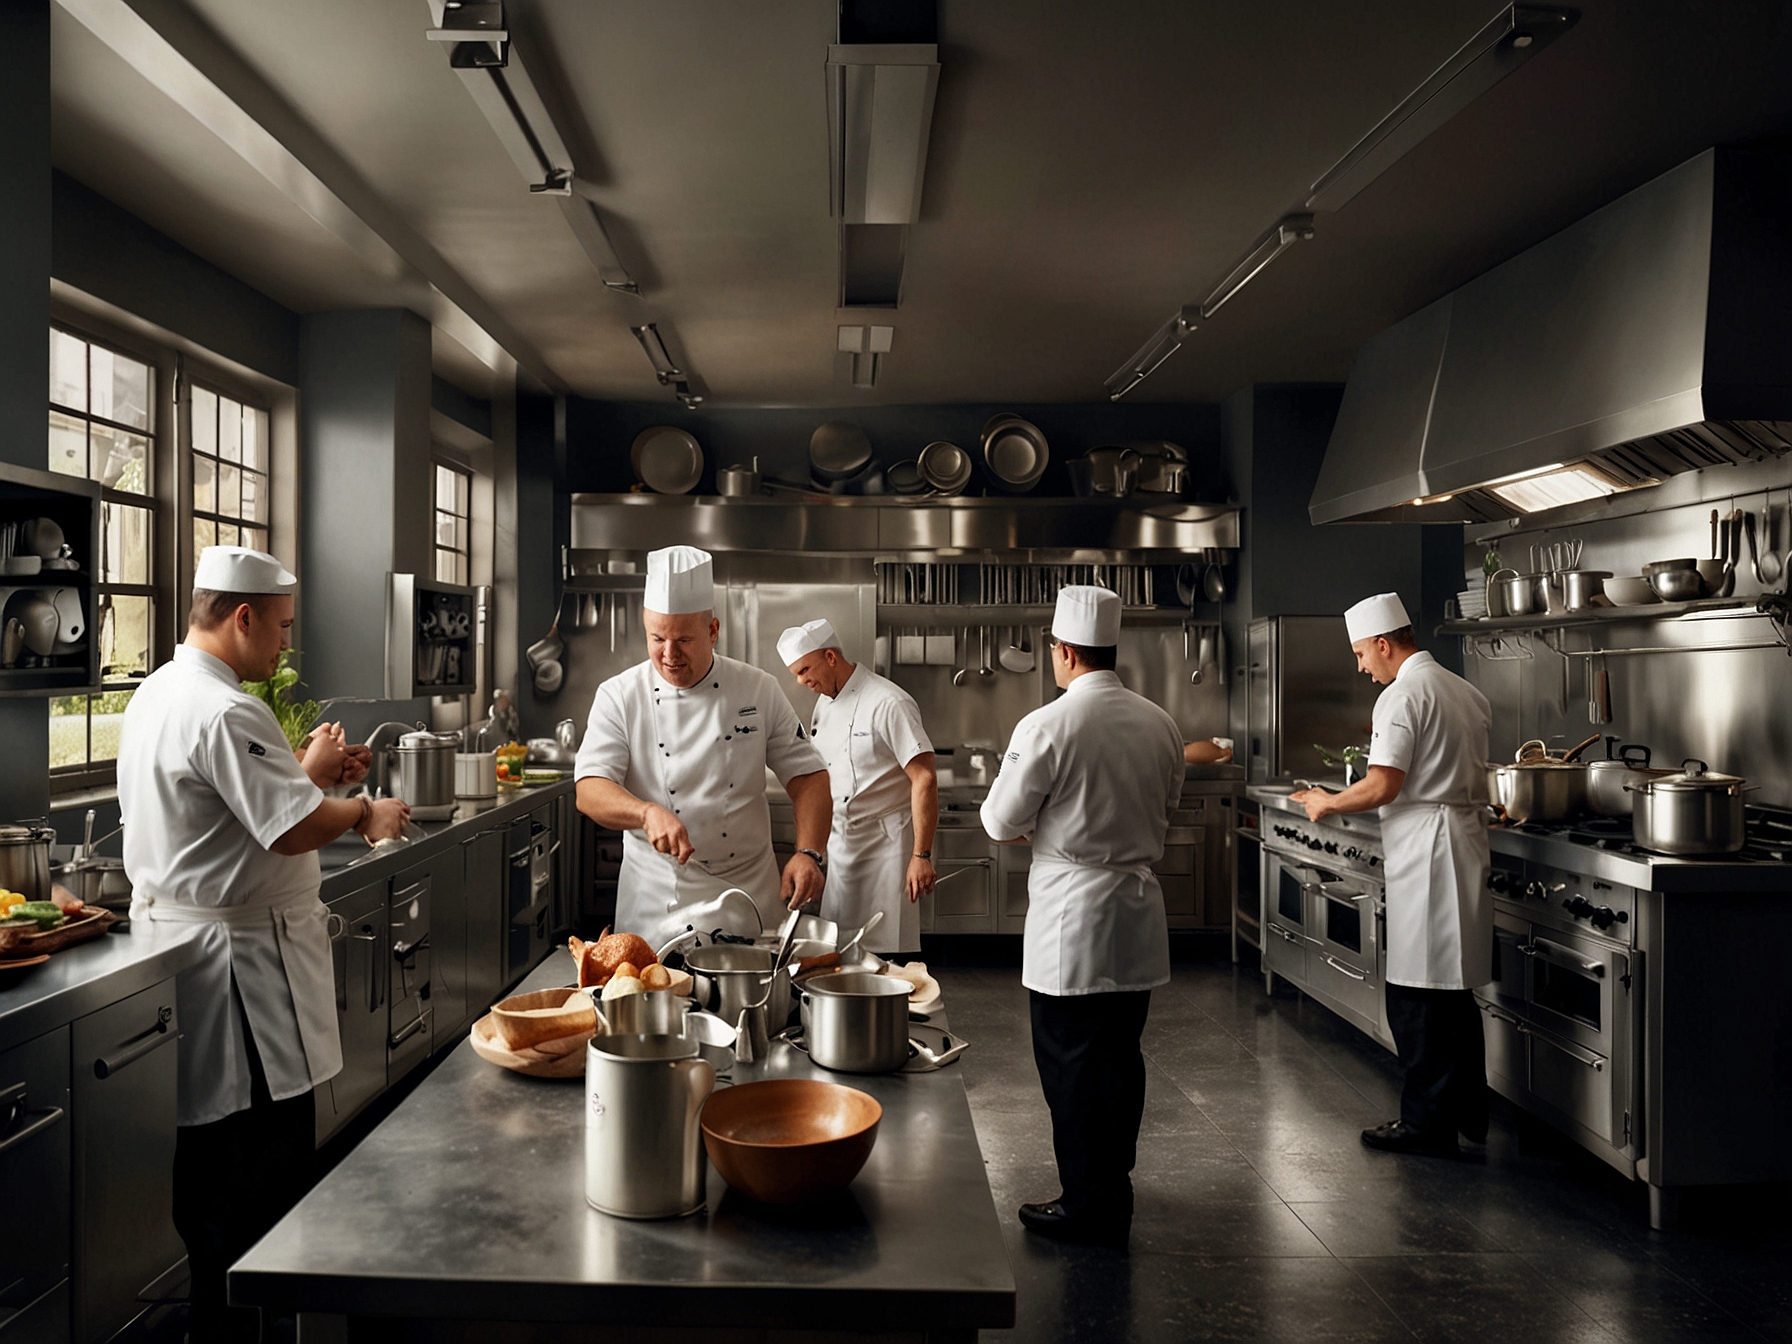 A bustling kitchen environment from 'The Bear,' showcasing chefs and line cooks in action, exemplifying the show's depiction of the hierarchical and dynamic culinary setting.